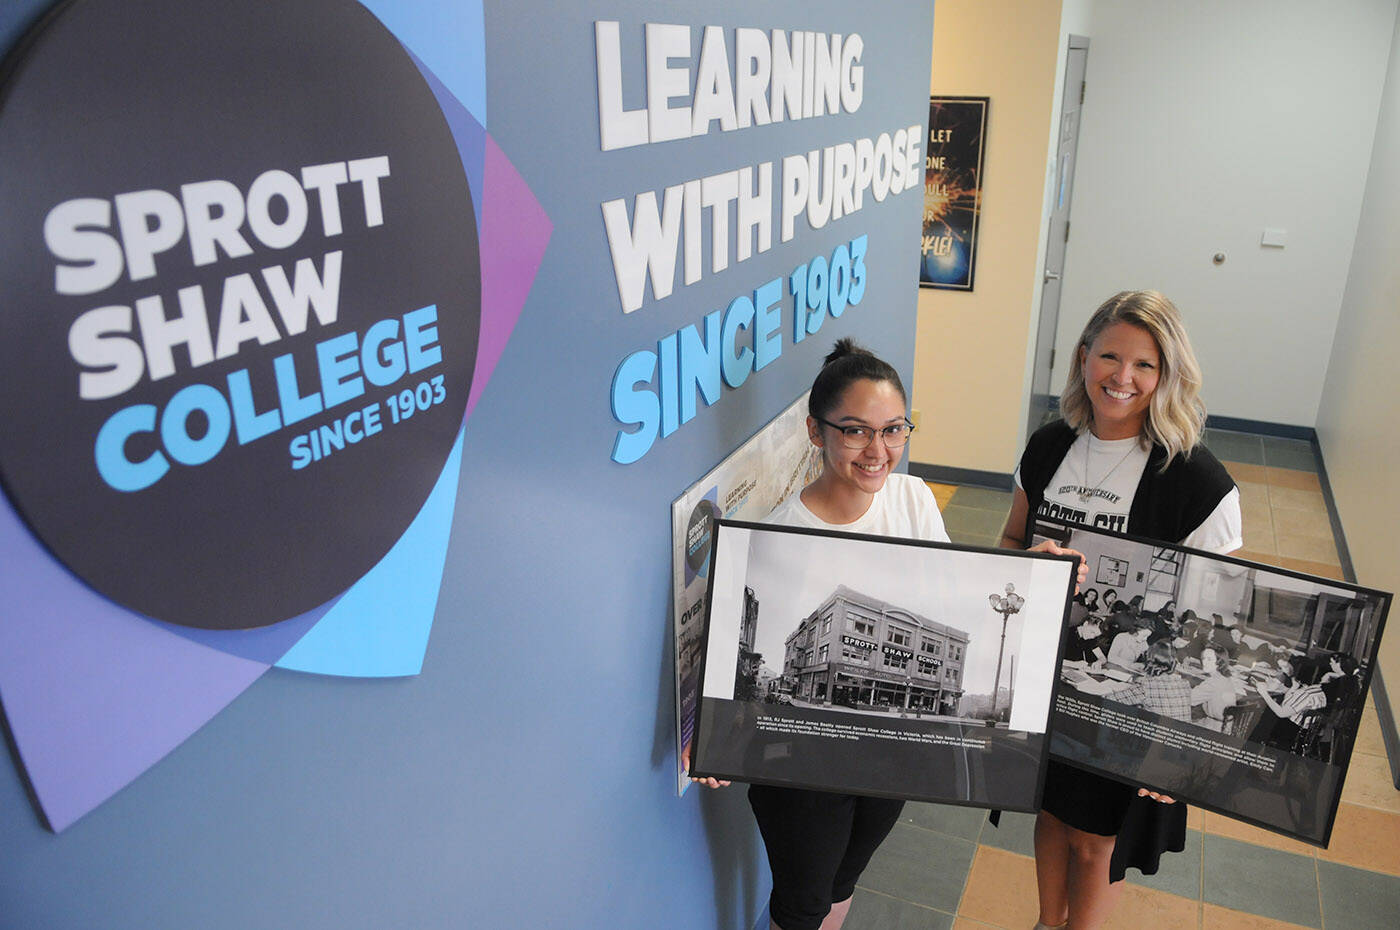 Britni Hannah (right), director of Sprott Shaw College Chilliwack campus, and Marissa Bell, employment services specialist, are inviting people to the schools 120th anniversary celebration on Aug. 17. (Jenna Hauck/ Chilliwack Progress)